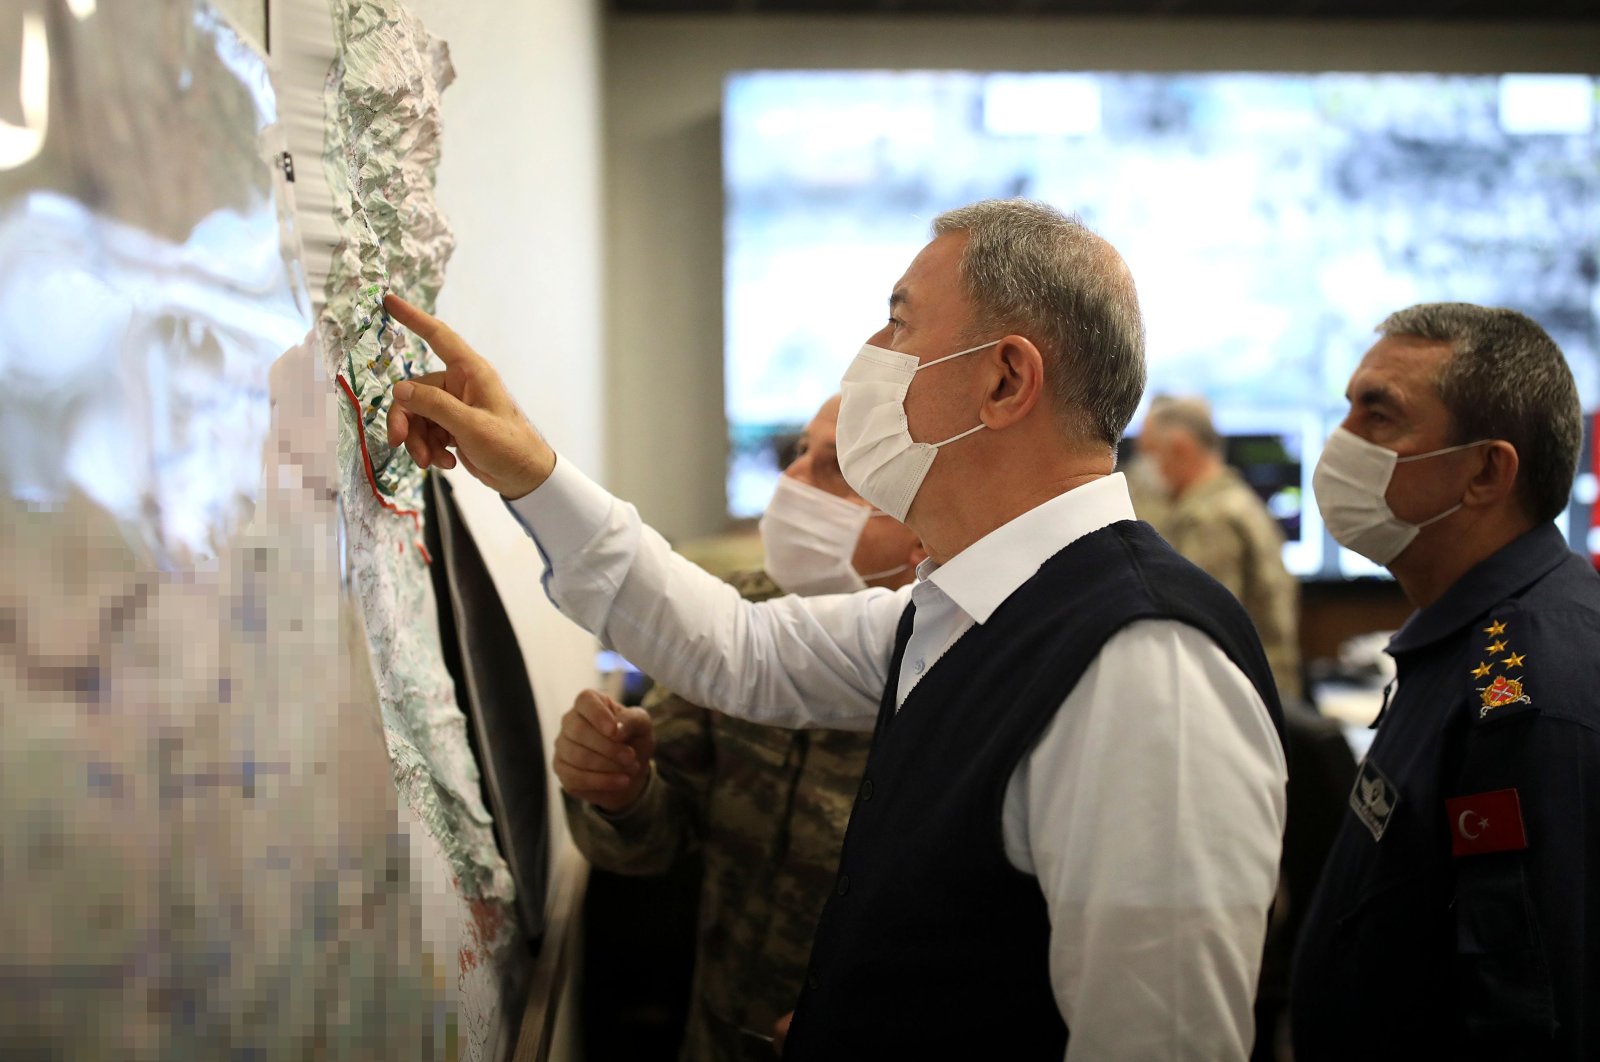 Defense Minister Hulusi Akar looks at a map with members of the Turkish Armed Forces Command during a meeting at the Army Command Control Center in Ankara during the military operation dubbed "Claw-Tiger" on June 17, 2020. (AFP Photo)